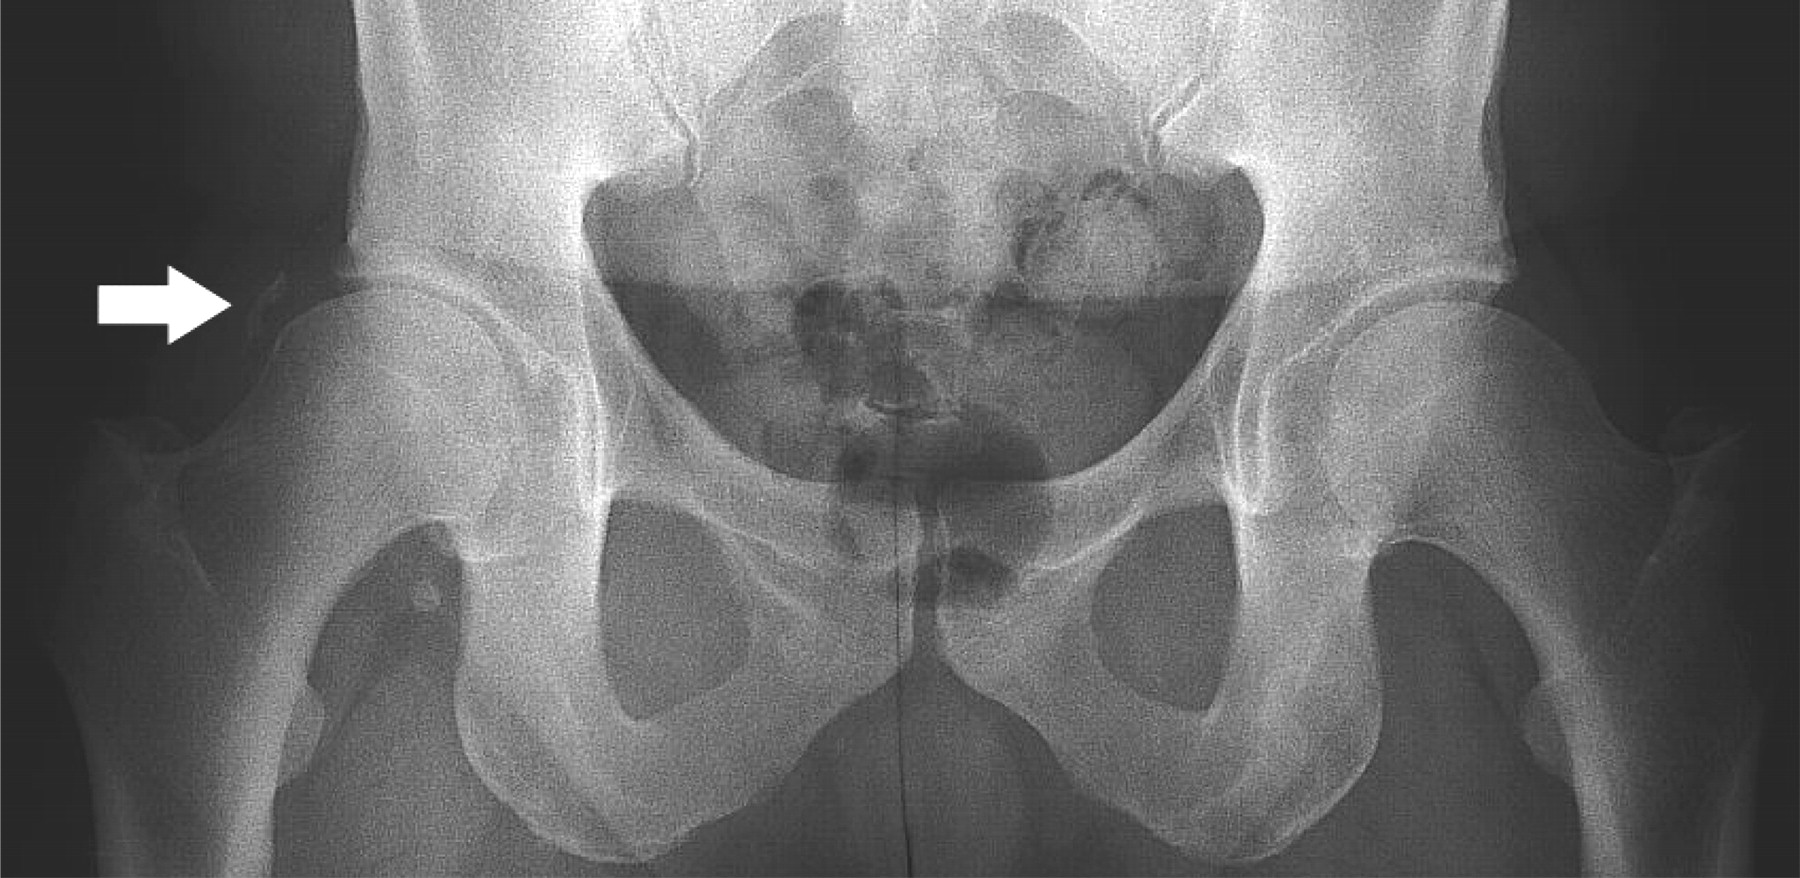 Fig. 7 
          Anteroposterior standing pelvic radiograph
of a 52-year-old man showing mild joint space narrowing and minor
heterotopic calcification (white arrow) of the right hip, after
two arthroscopies of that joint with no post-operative prophylaxis given
for heterotopic ossification.
        